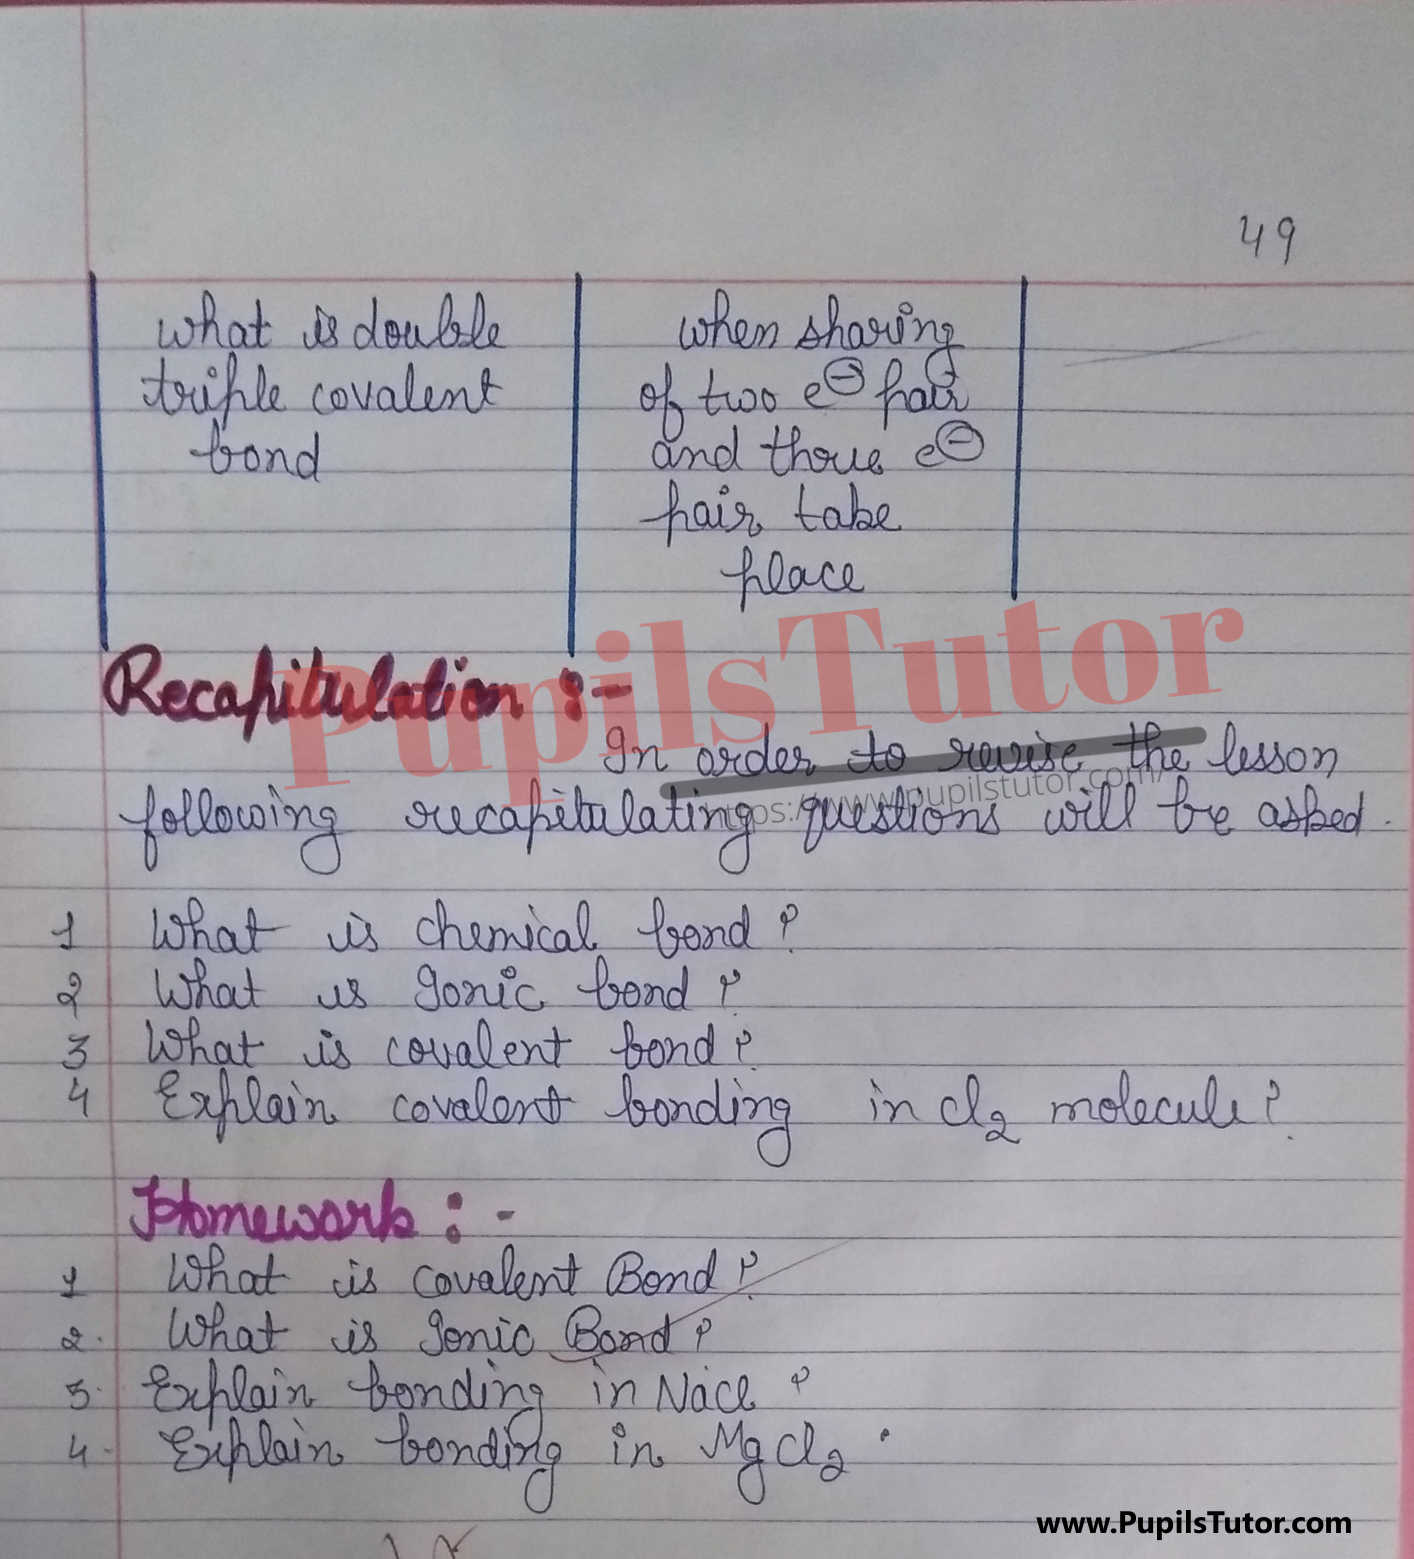 Lesson Plan On Chemical And Covalent Bonding For Class 10th.  – [Page And Pic Number 5] – https://www.pupilstutor.com/